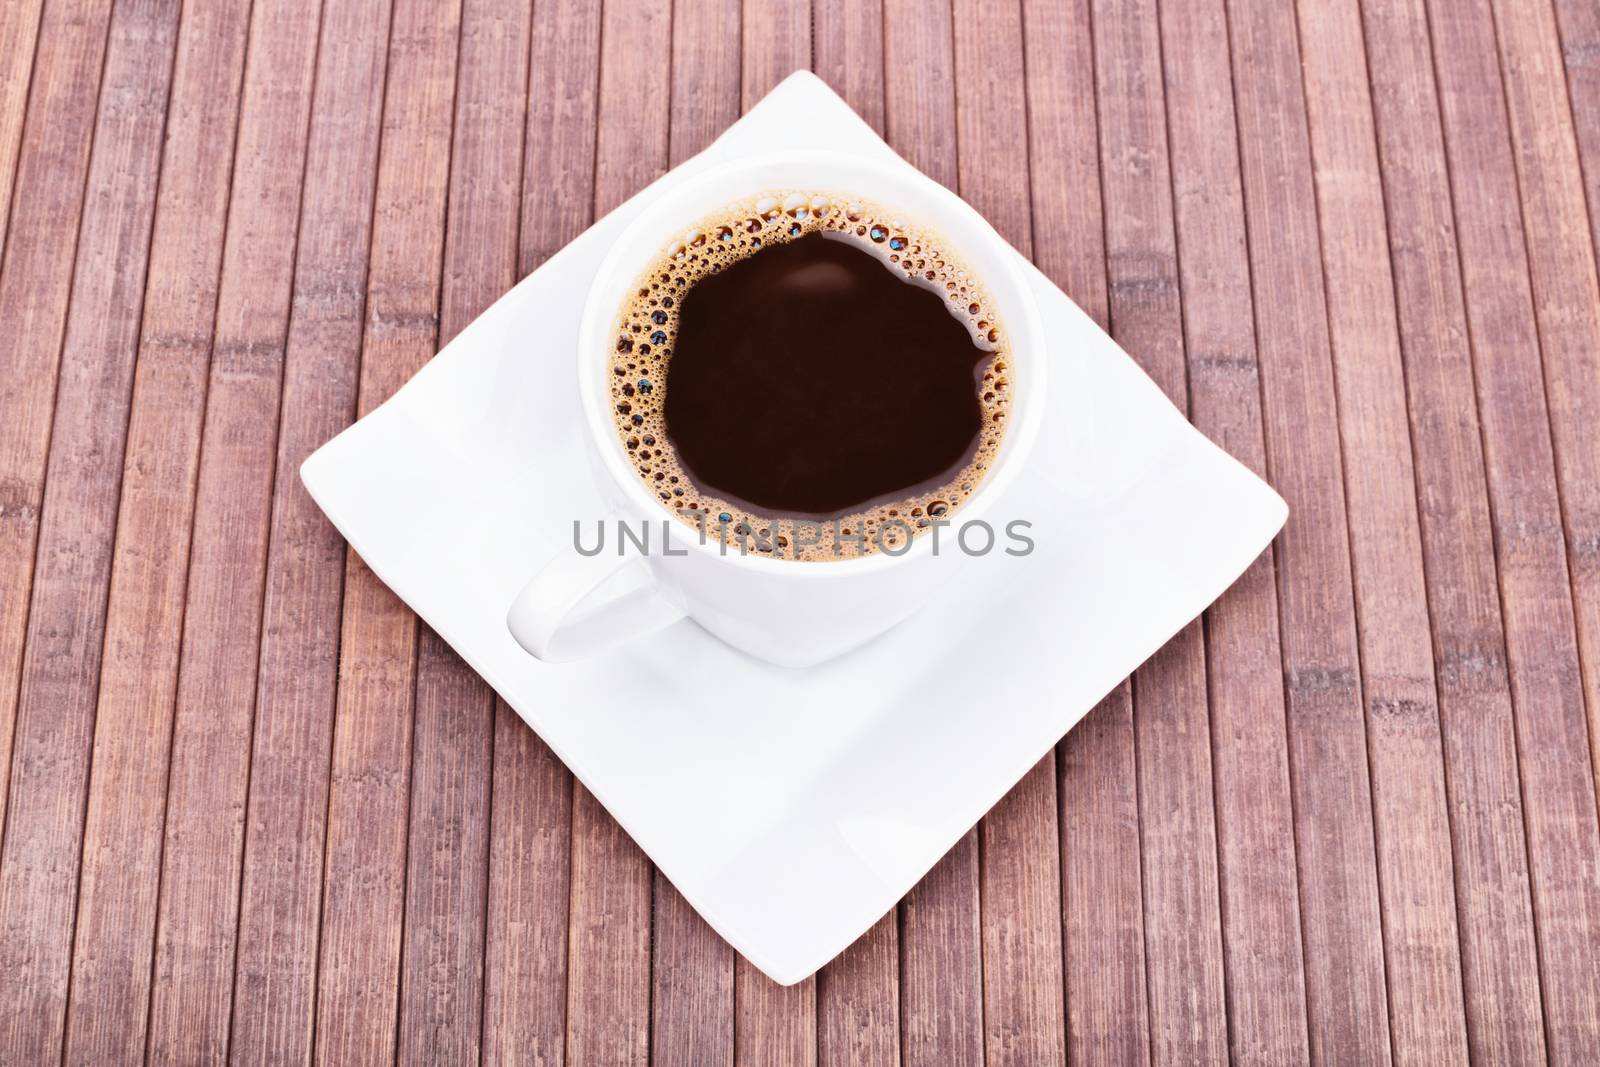 White cup of freshly brewed coffee on wooden background.